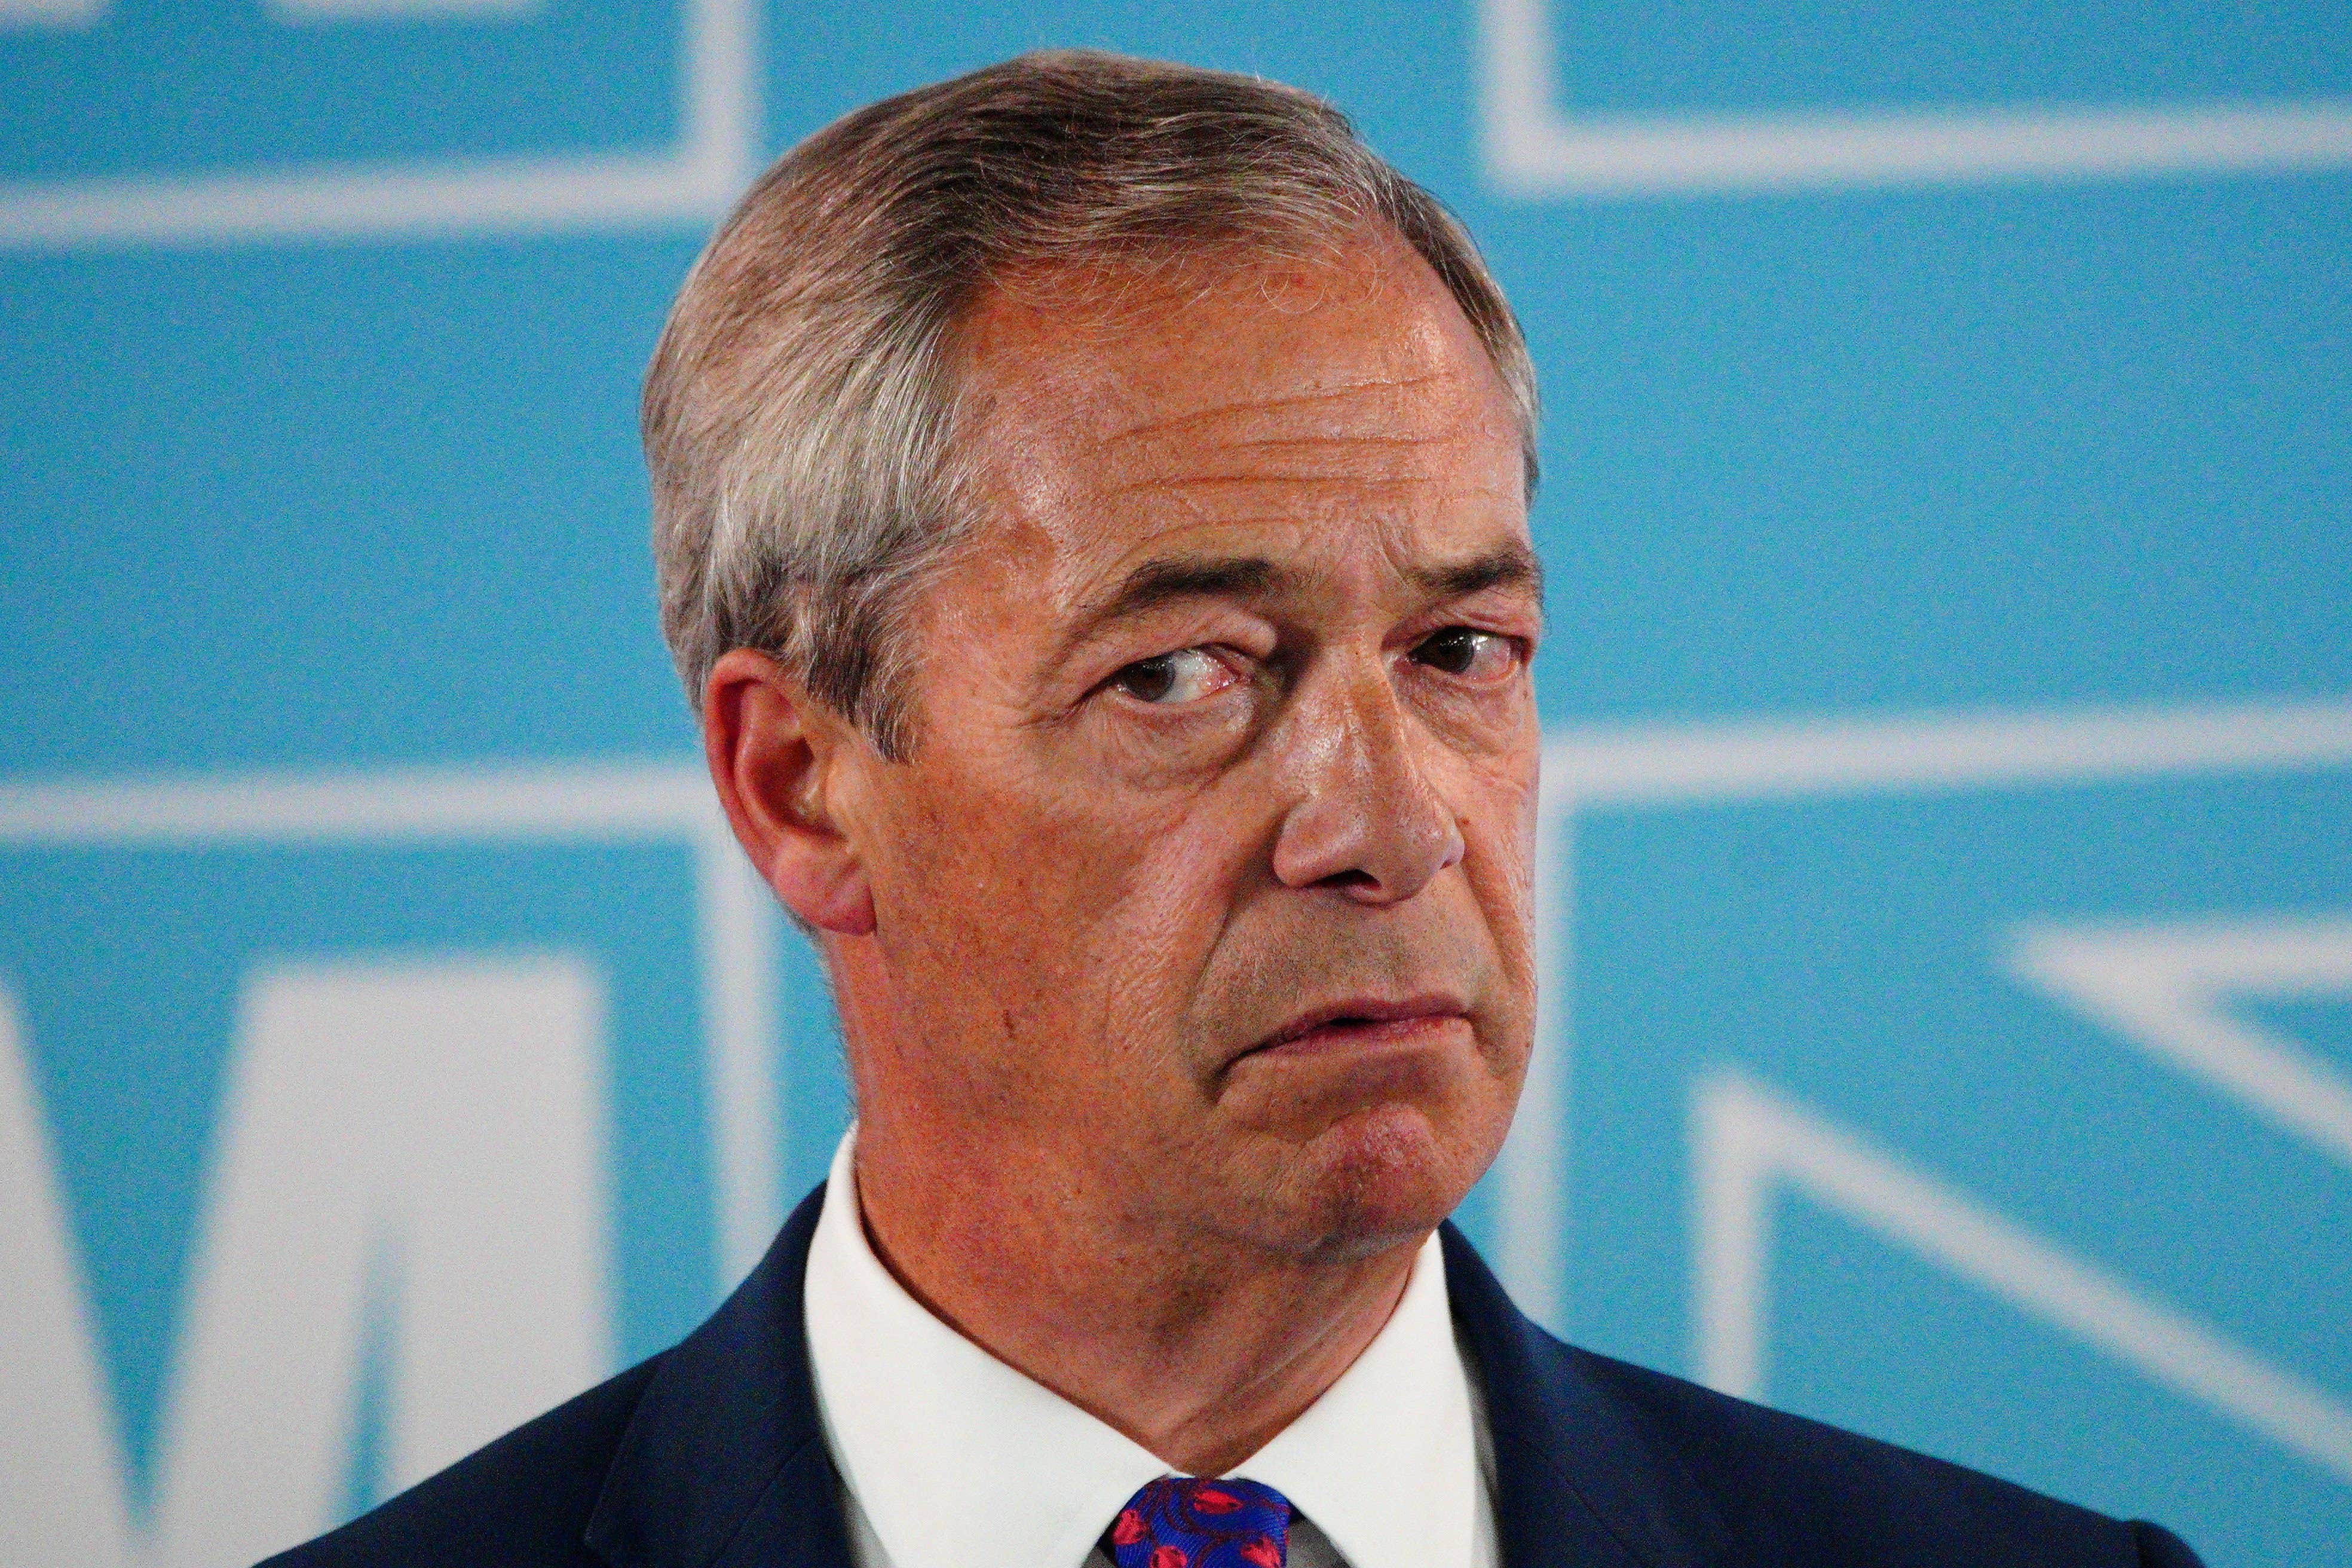 Farage claims to have paid £144,000 to the vetting company